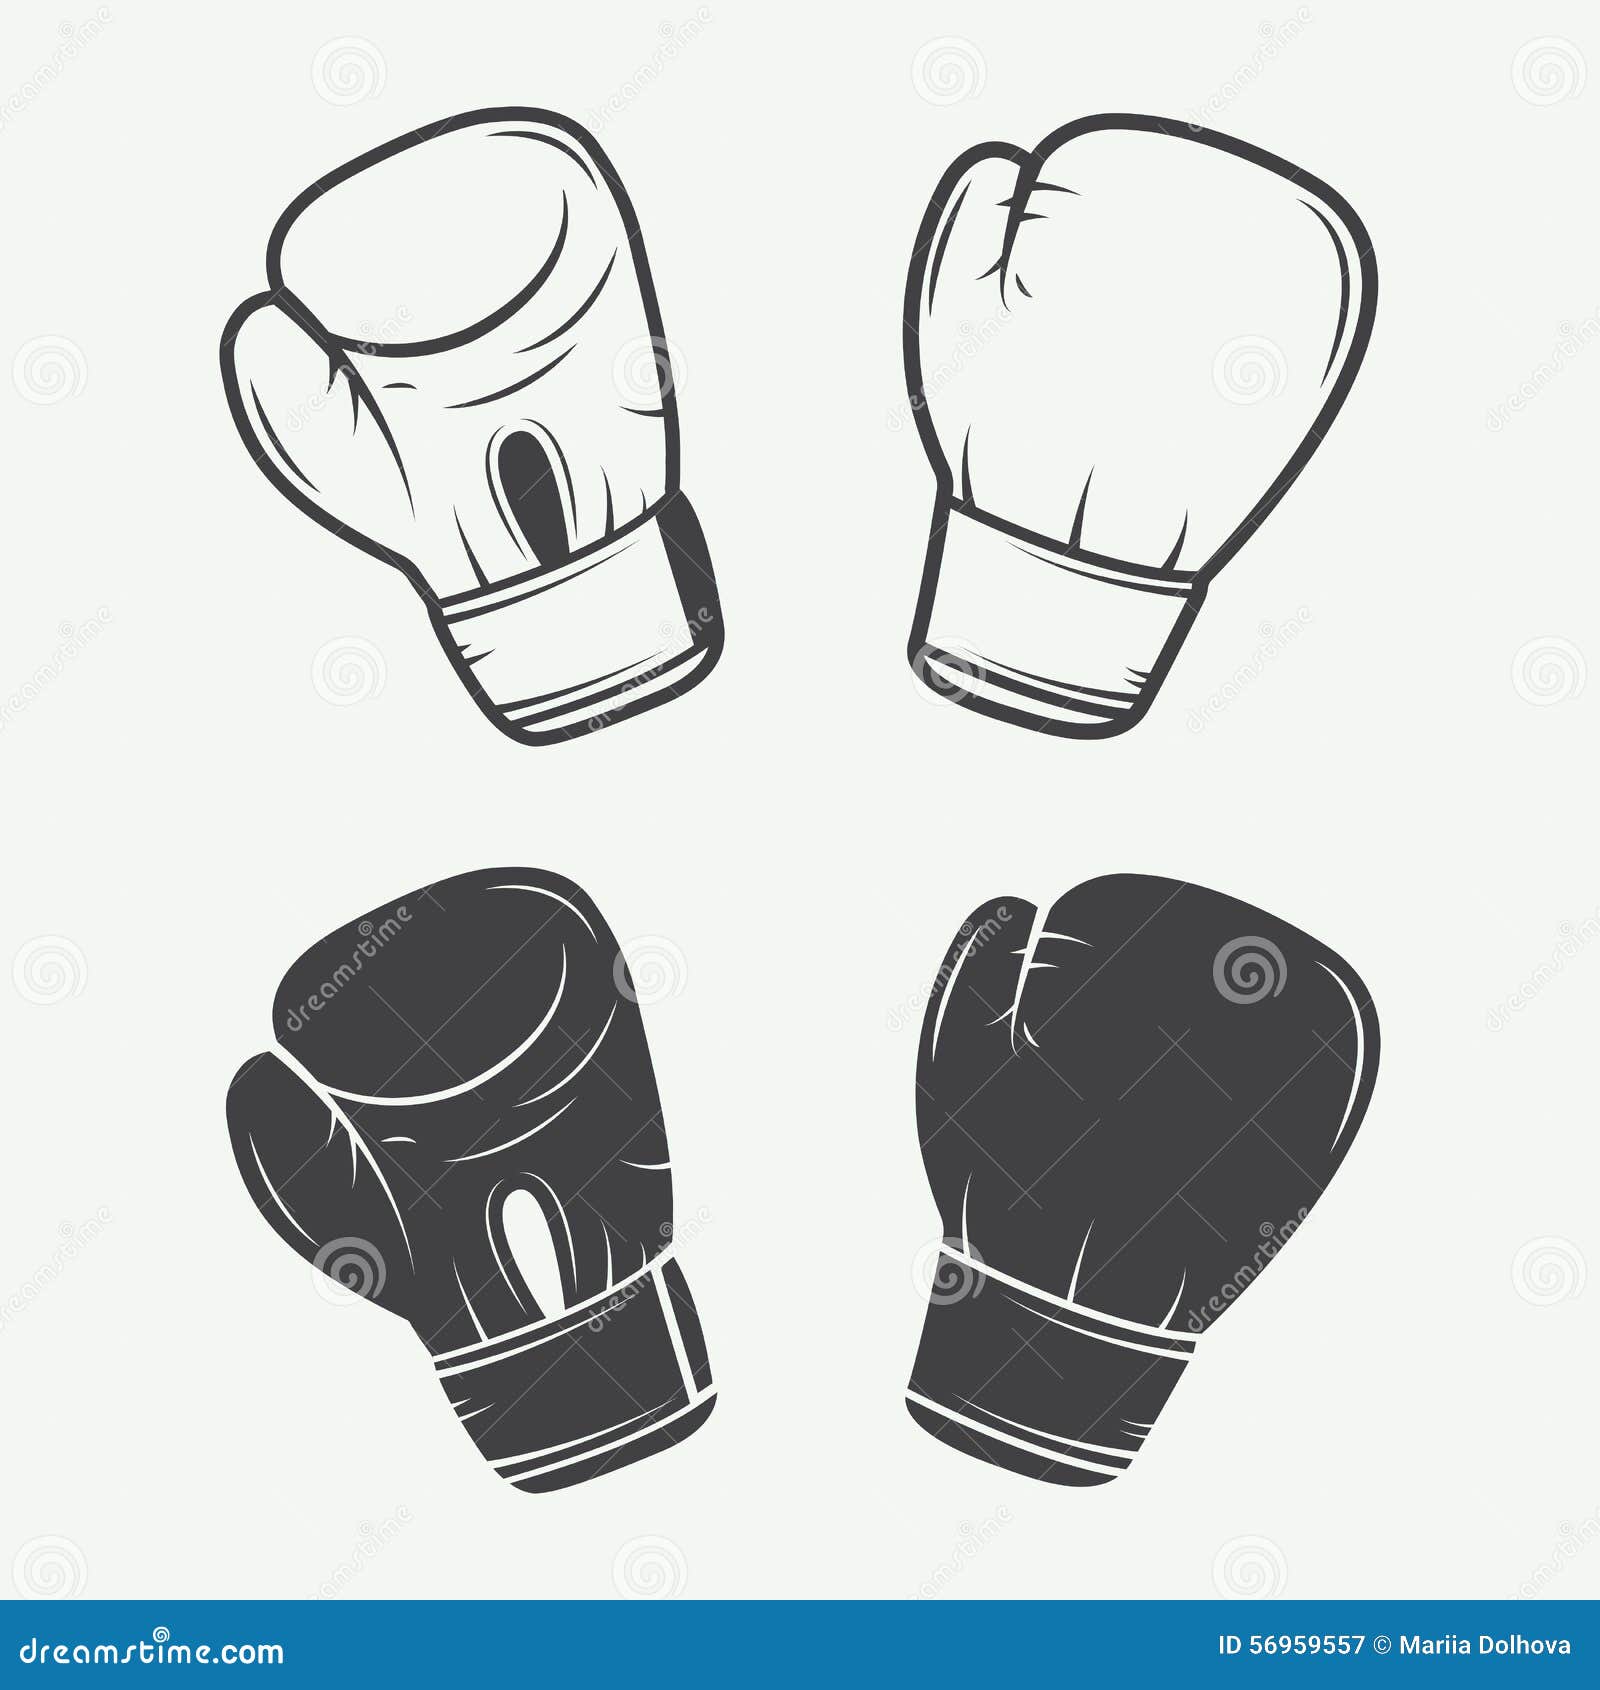 boxing gloves in vintage style.